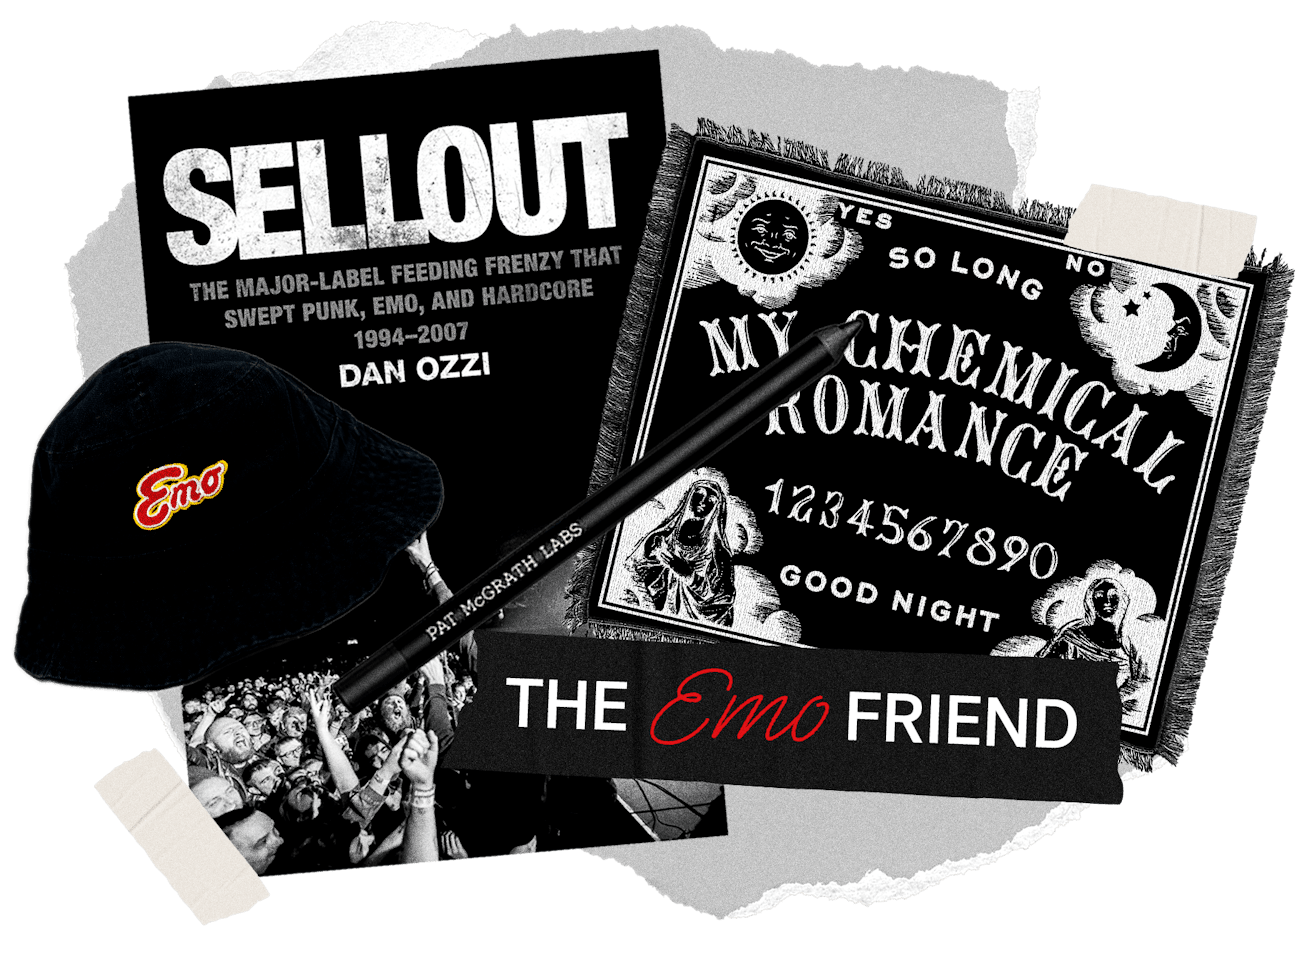 Gift suggestions for Emo friends